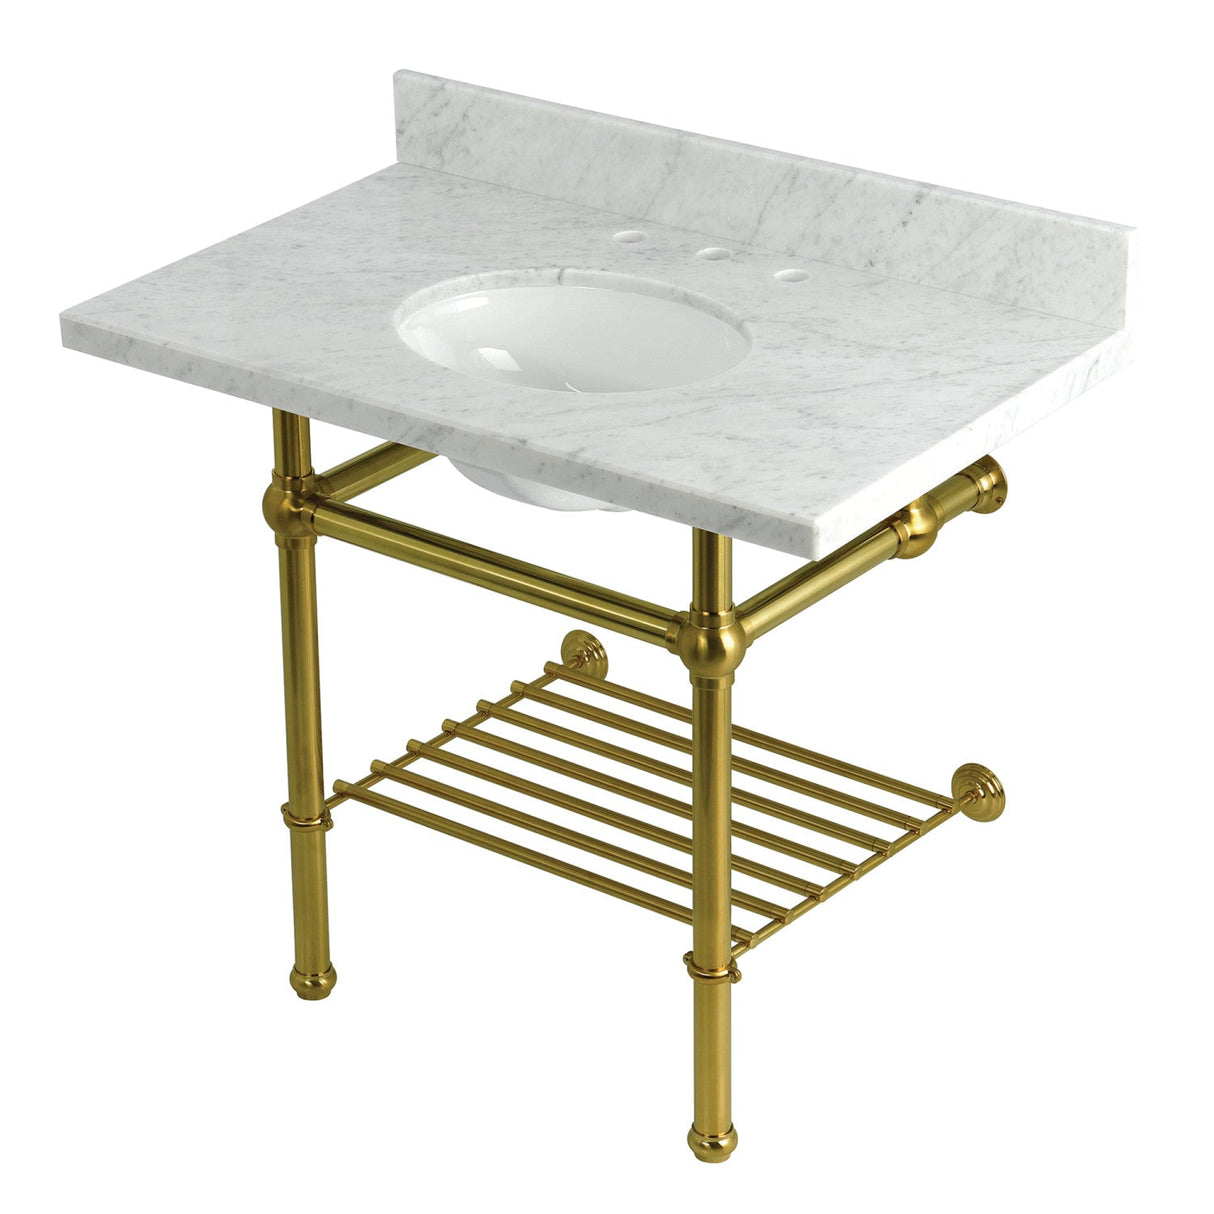 Templeton KVPB3630MBB7 36-Inch Console Sink with Brass Legs (8-Inch, 3 Hole), Carrara Marble/Brushed Brass